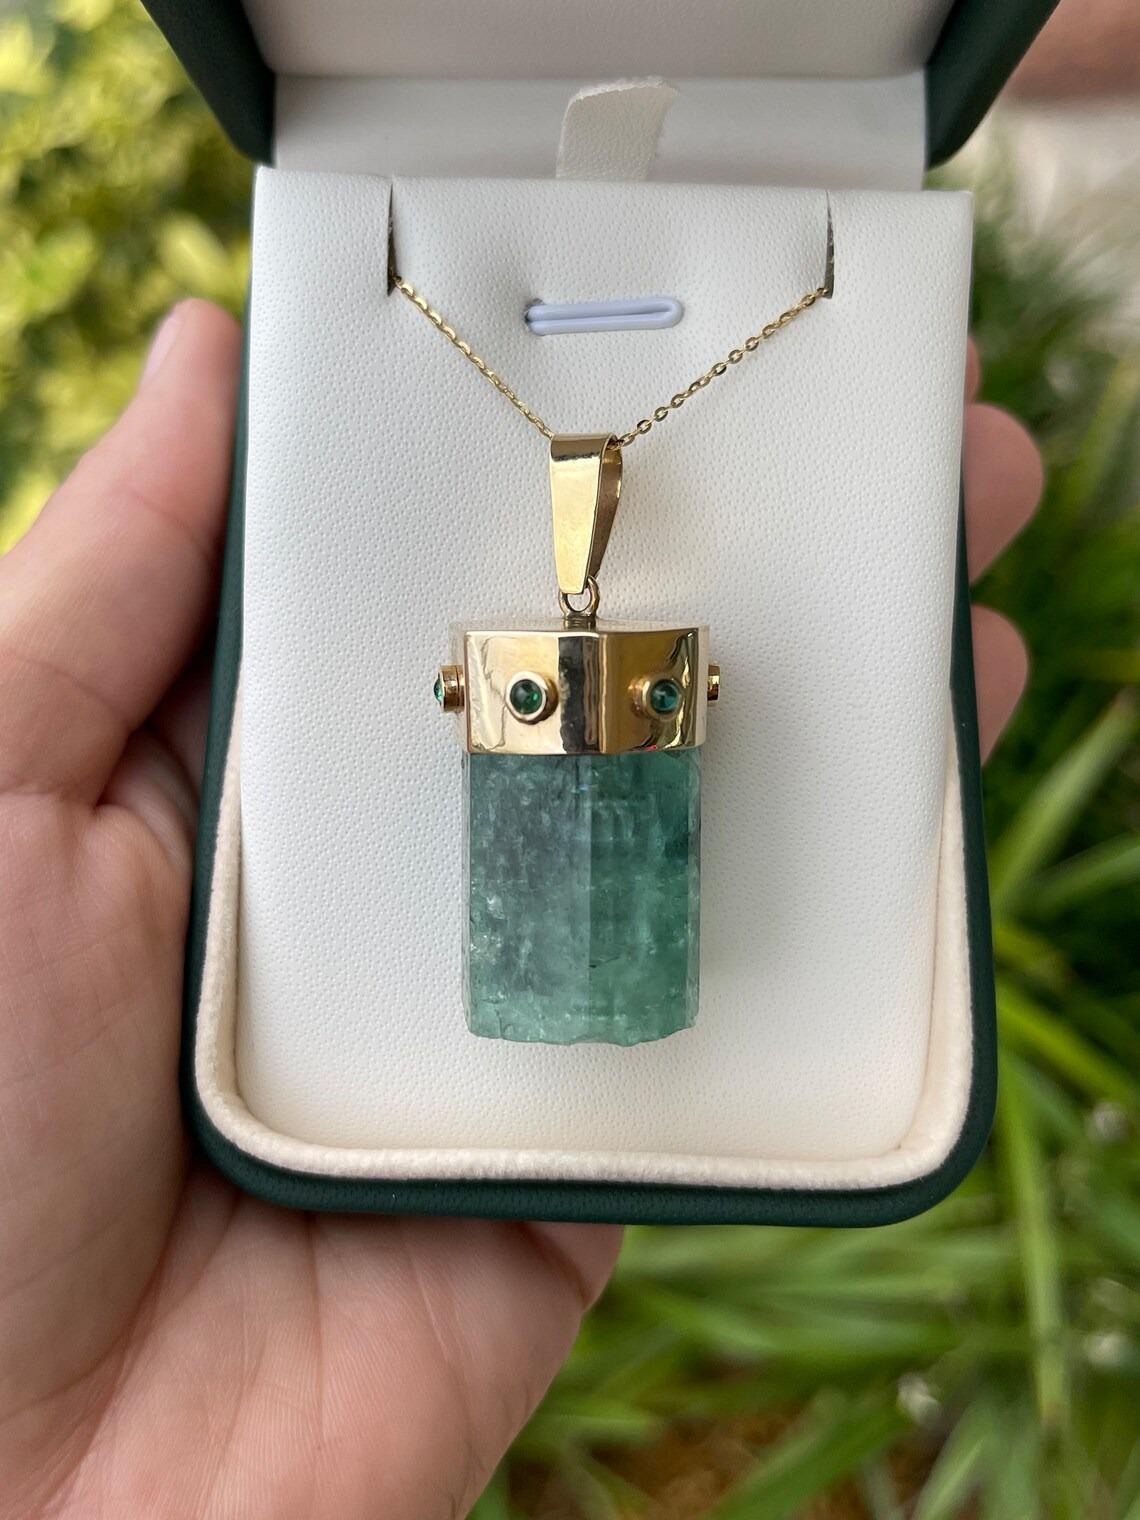 This is an impressive and rare, estimated 113-carat, all-natural Colombian emerald from the Muzo Mines! The rough specimen is semi-transparent, displaying incredible crystal clarity. A medium green color is seen in this stunning piece with the most